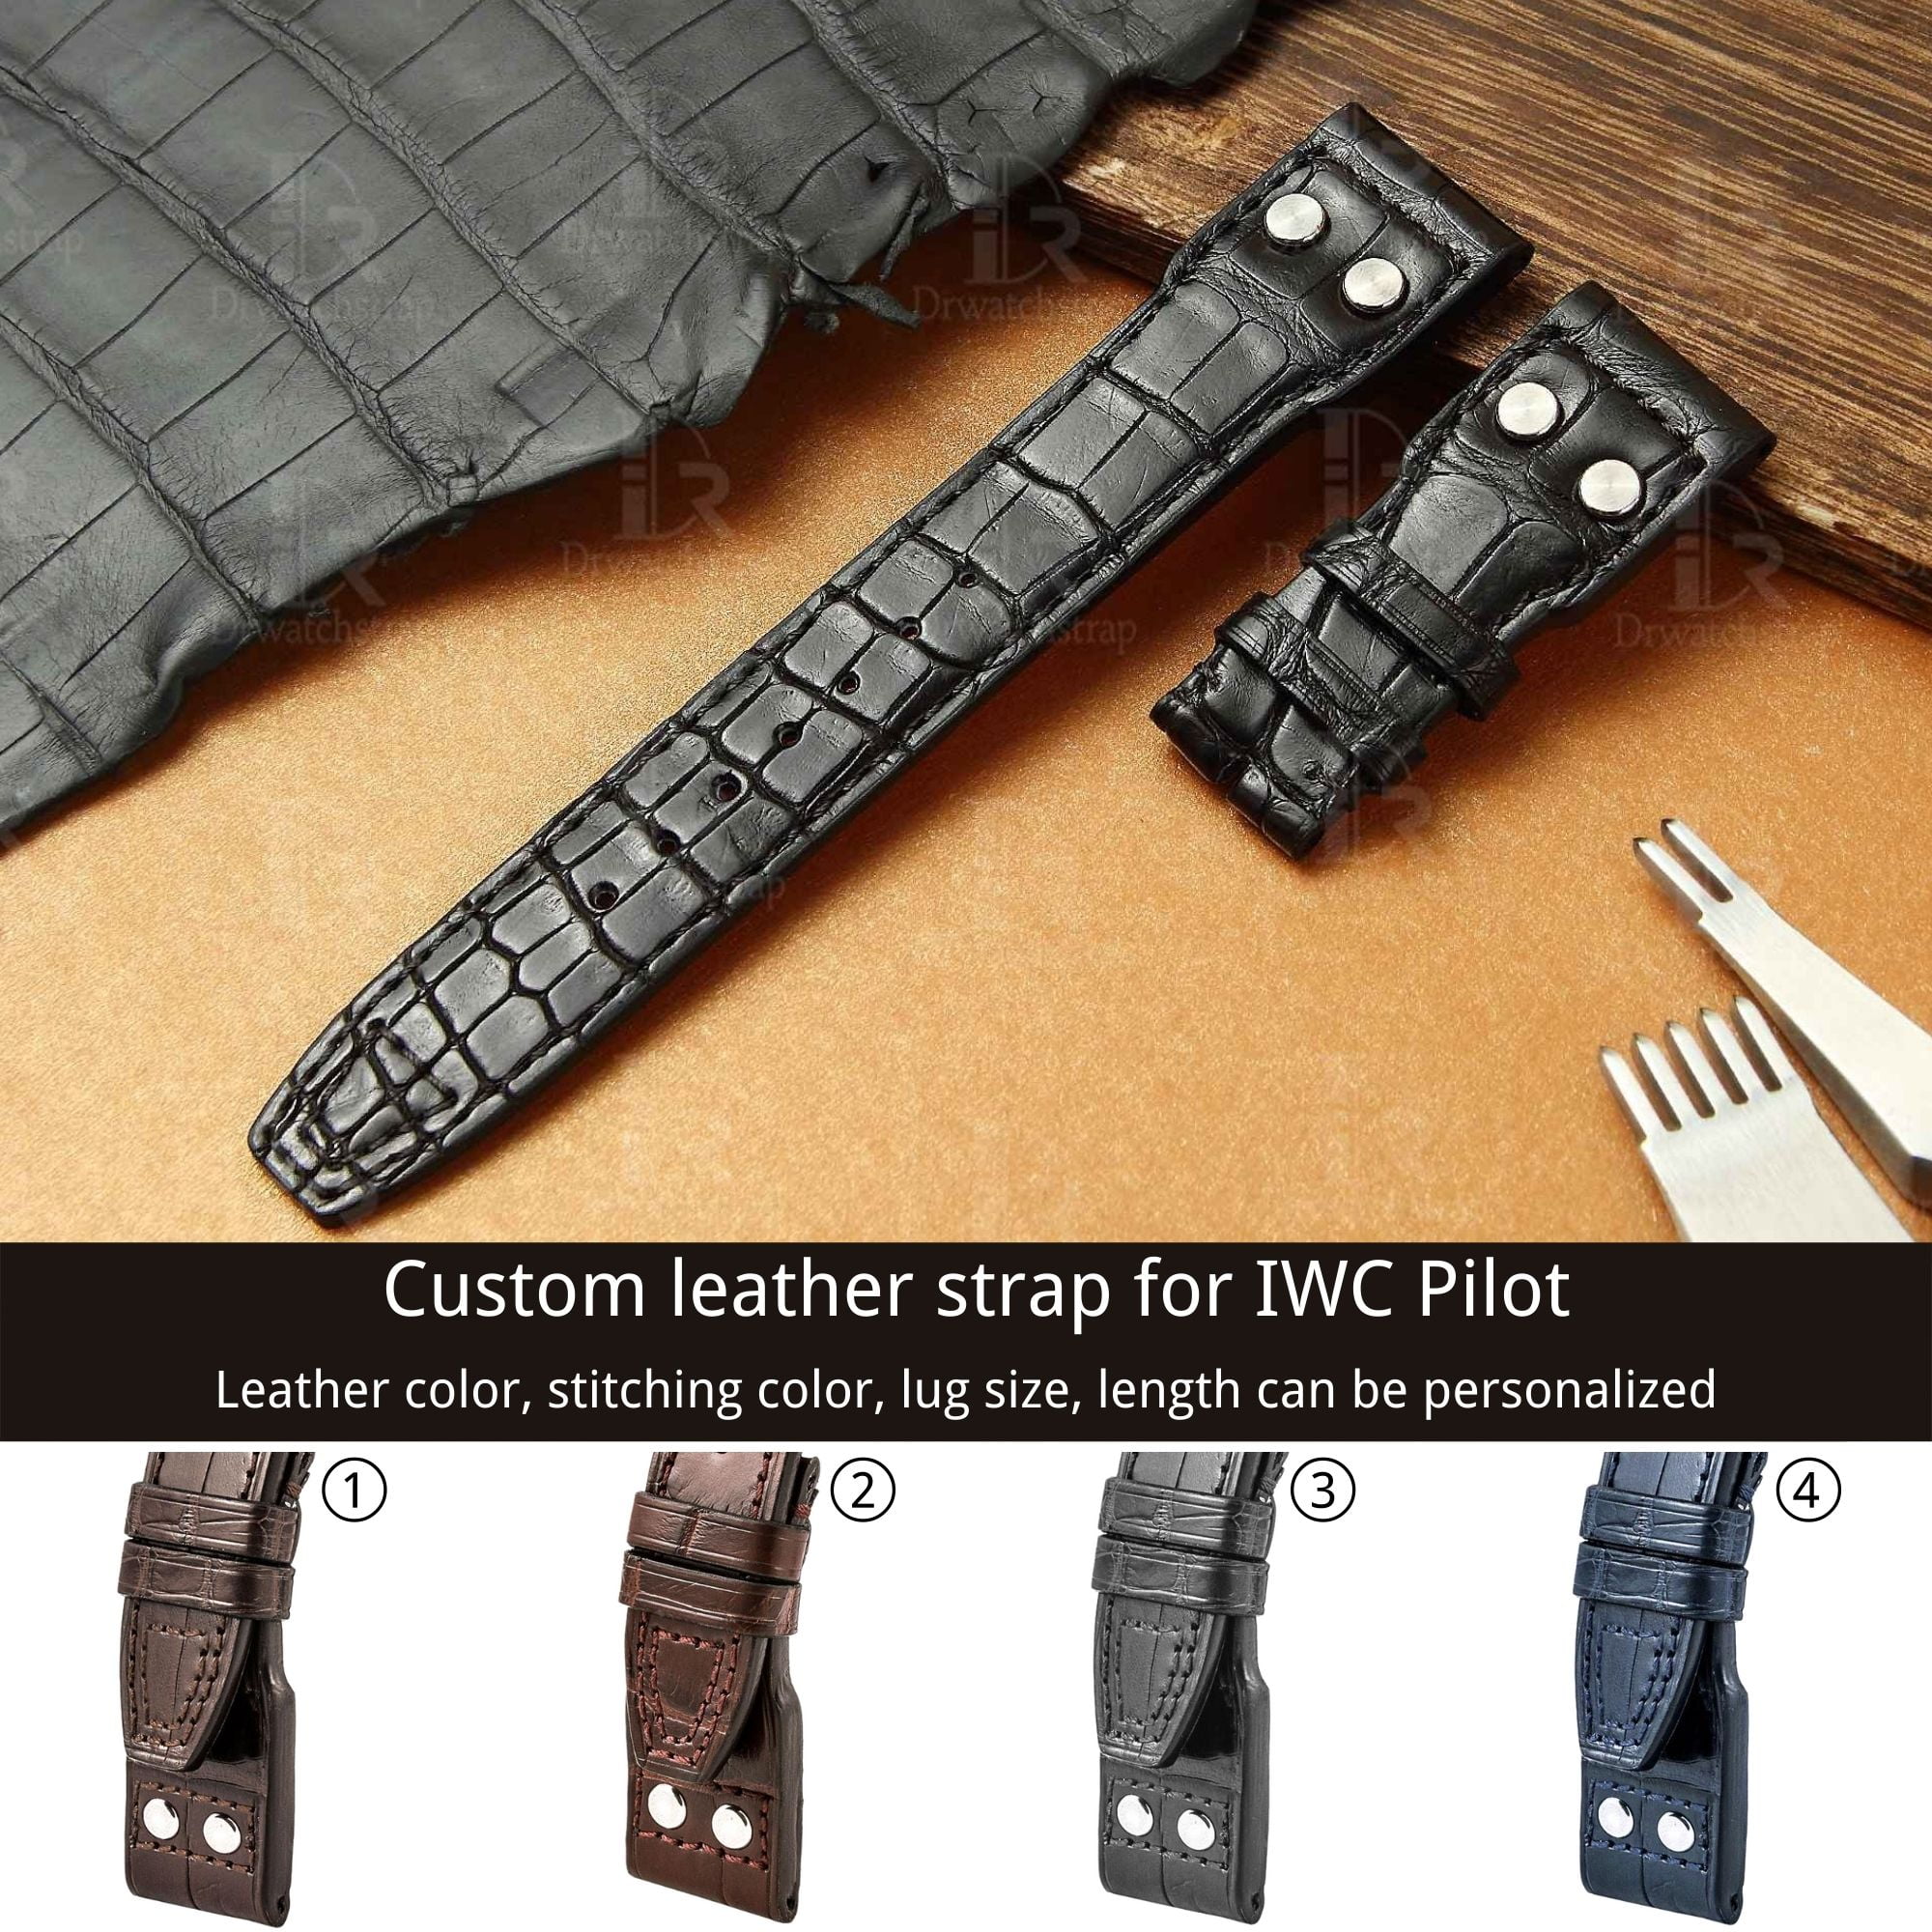 Custom OEM best quality American Alligator black Belly-scale leather replacement IWC Big Pilot watch strap and watch band online - Shop the high-end straps and watch bands at a low price 22mm with rivets